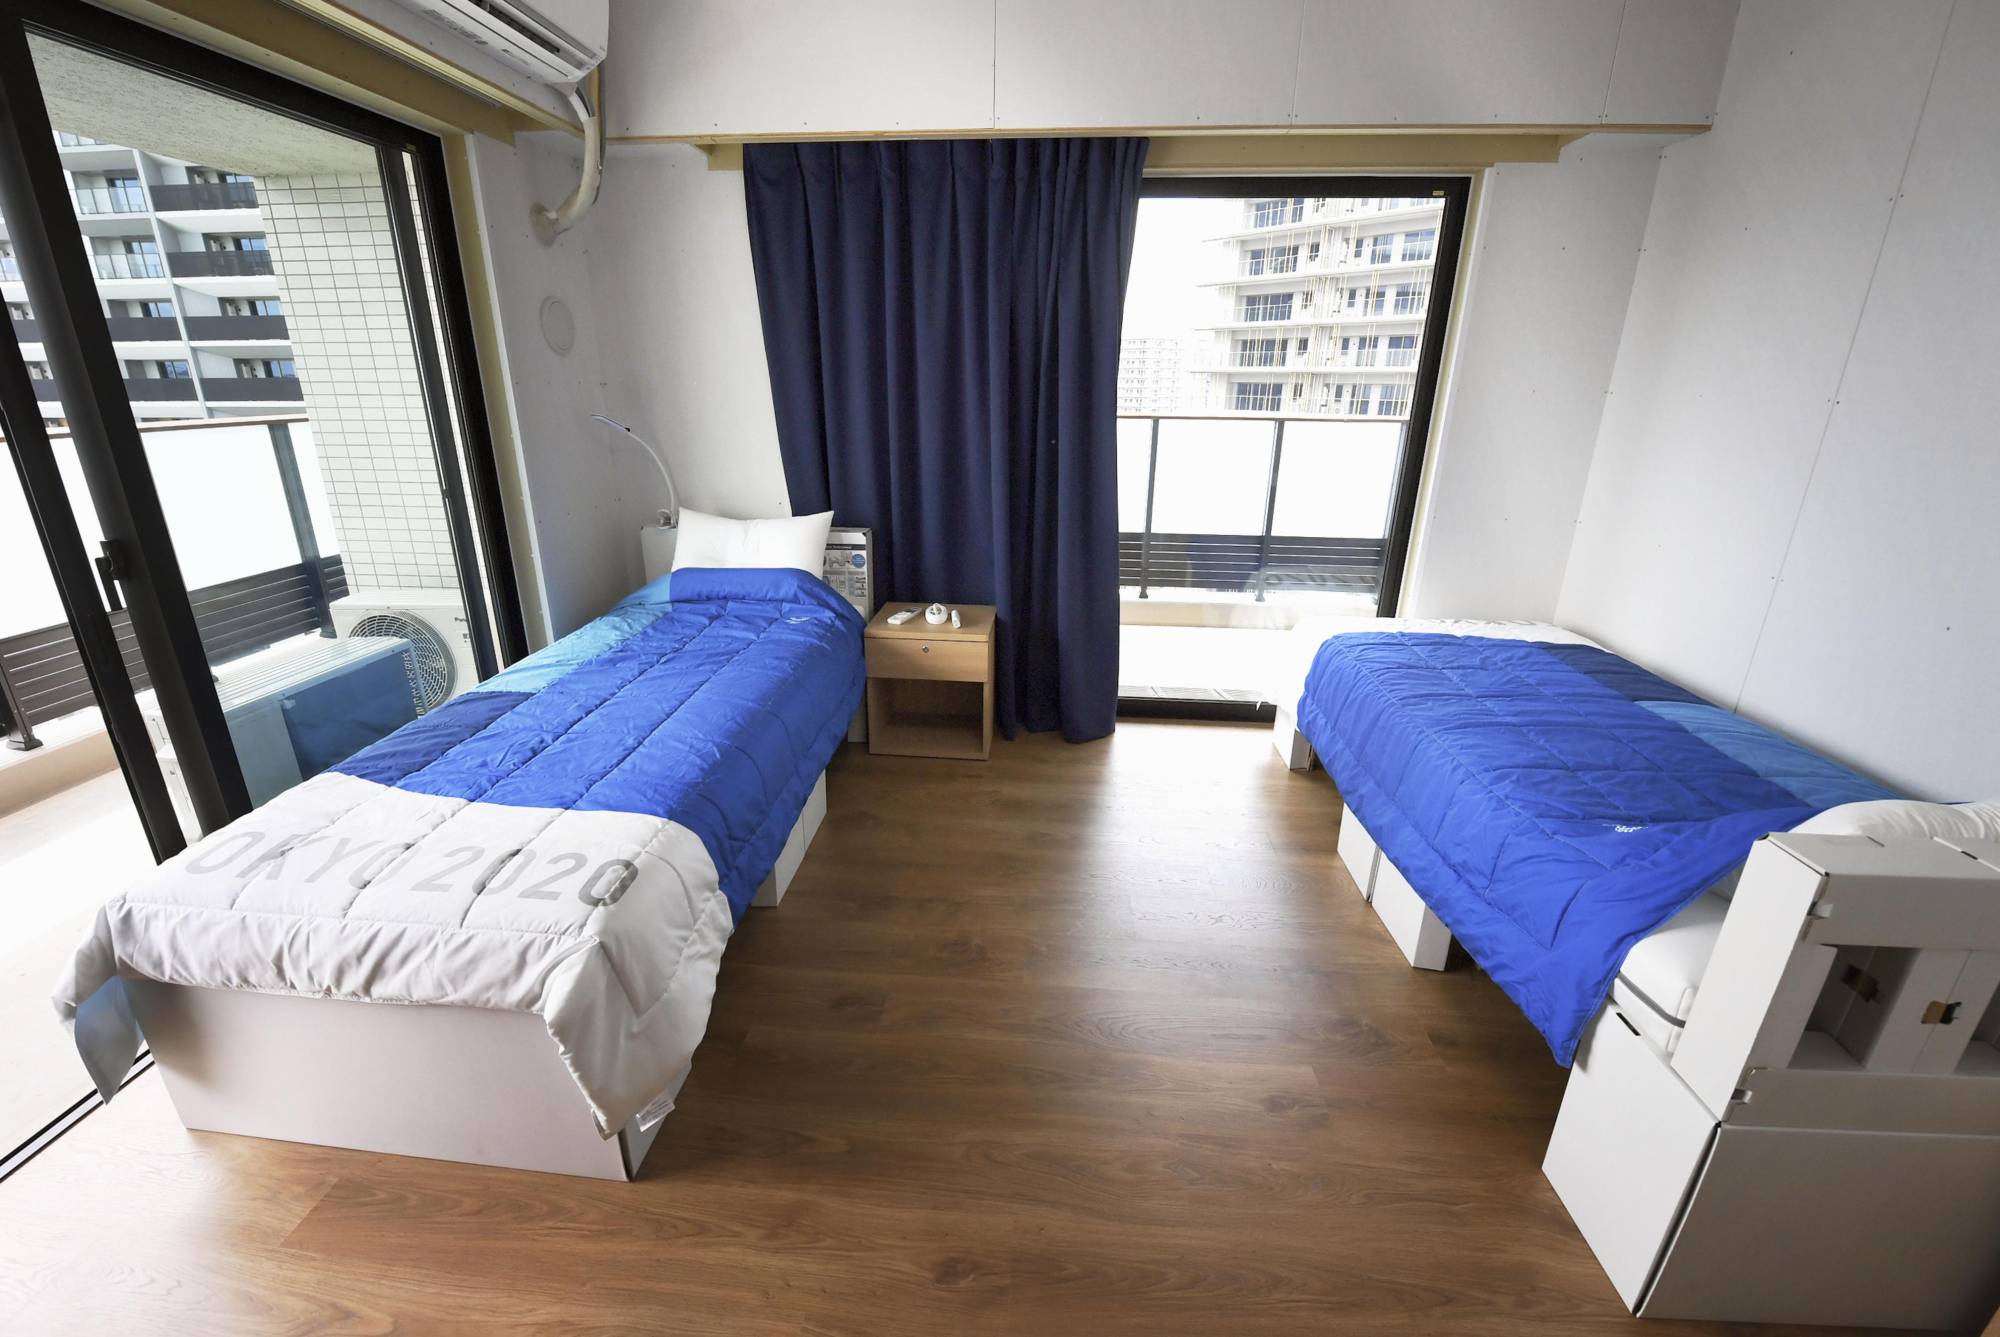 Cardboard beds used in the Tokyo 2020 athletes village | KYODO